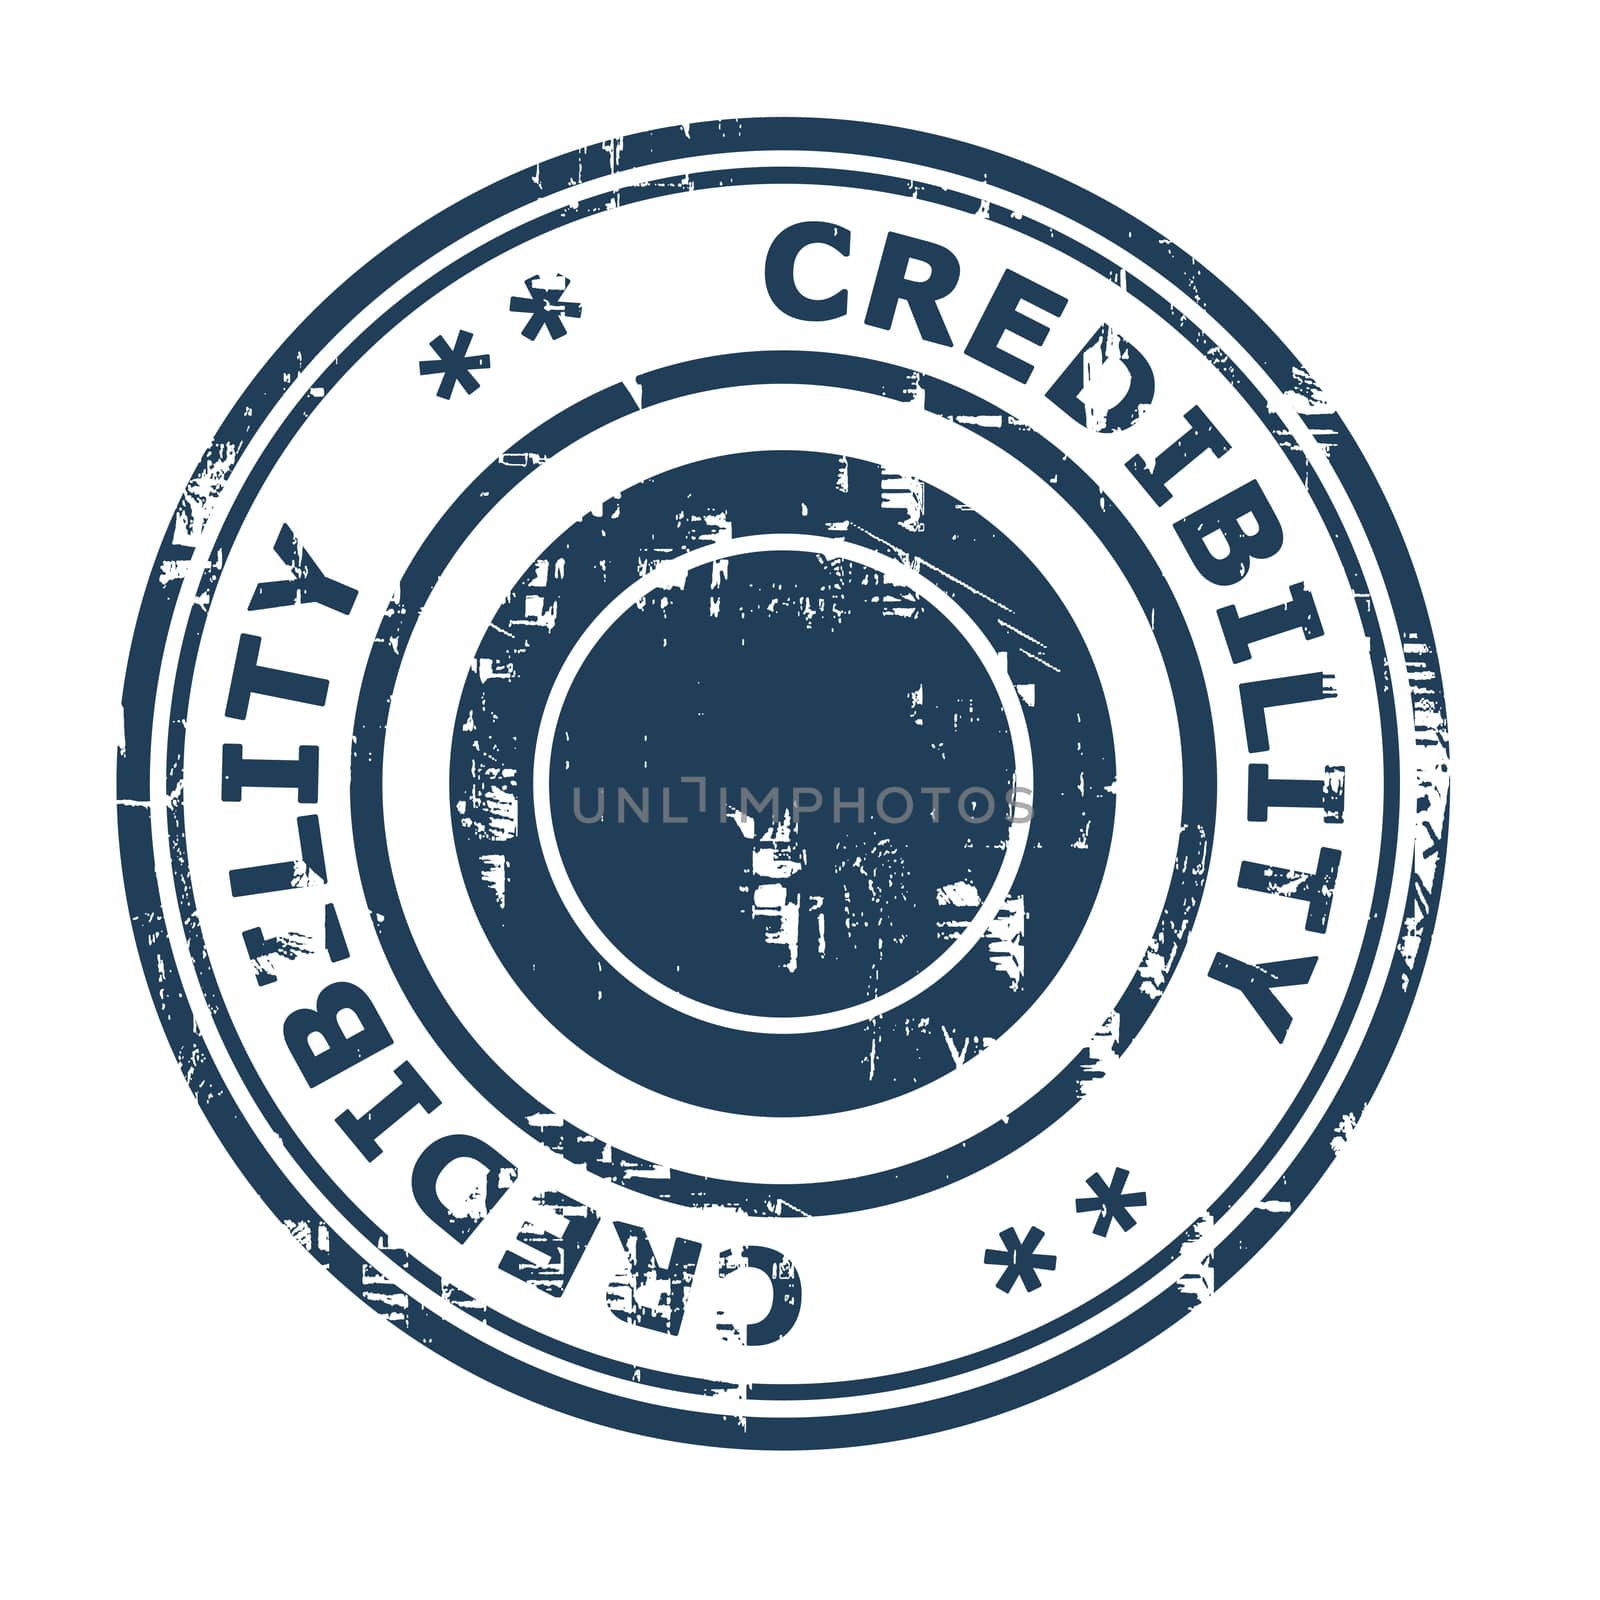 Credibility business concept rubber stamp isolated on a white background.